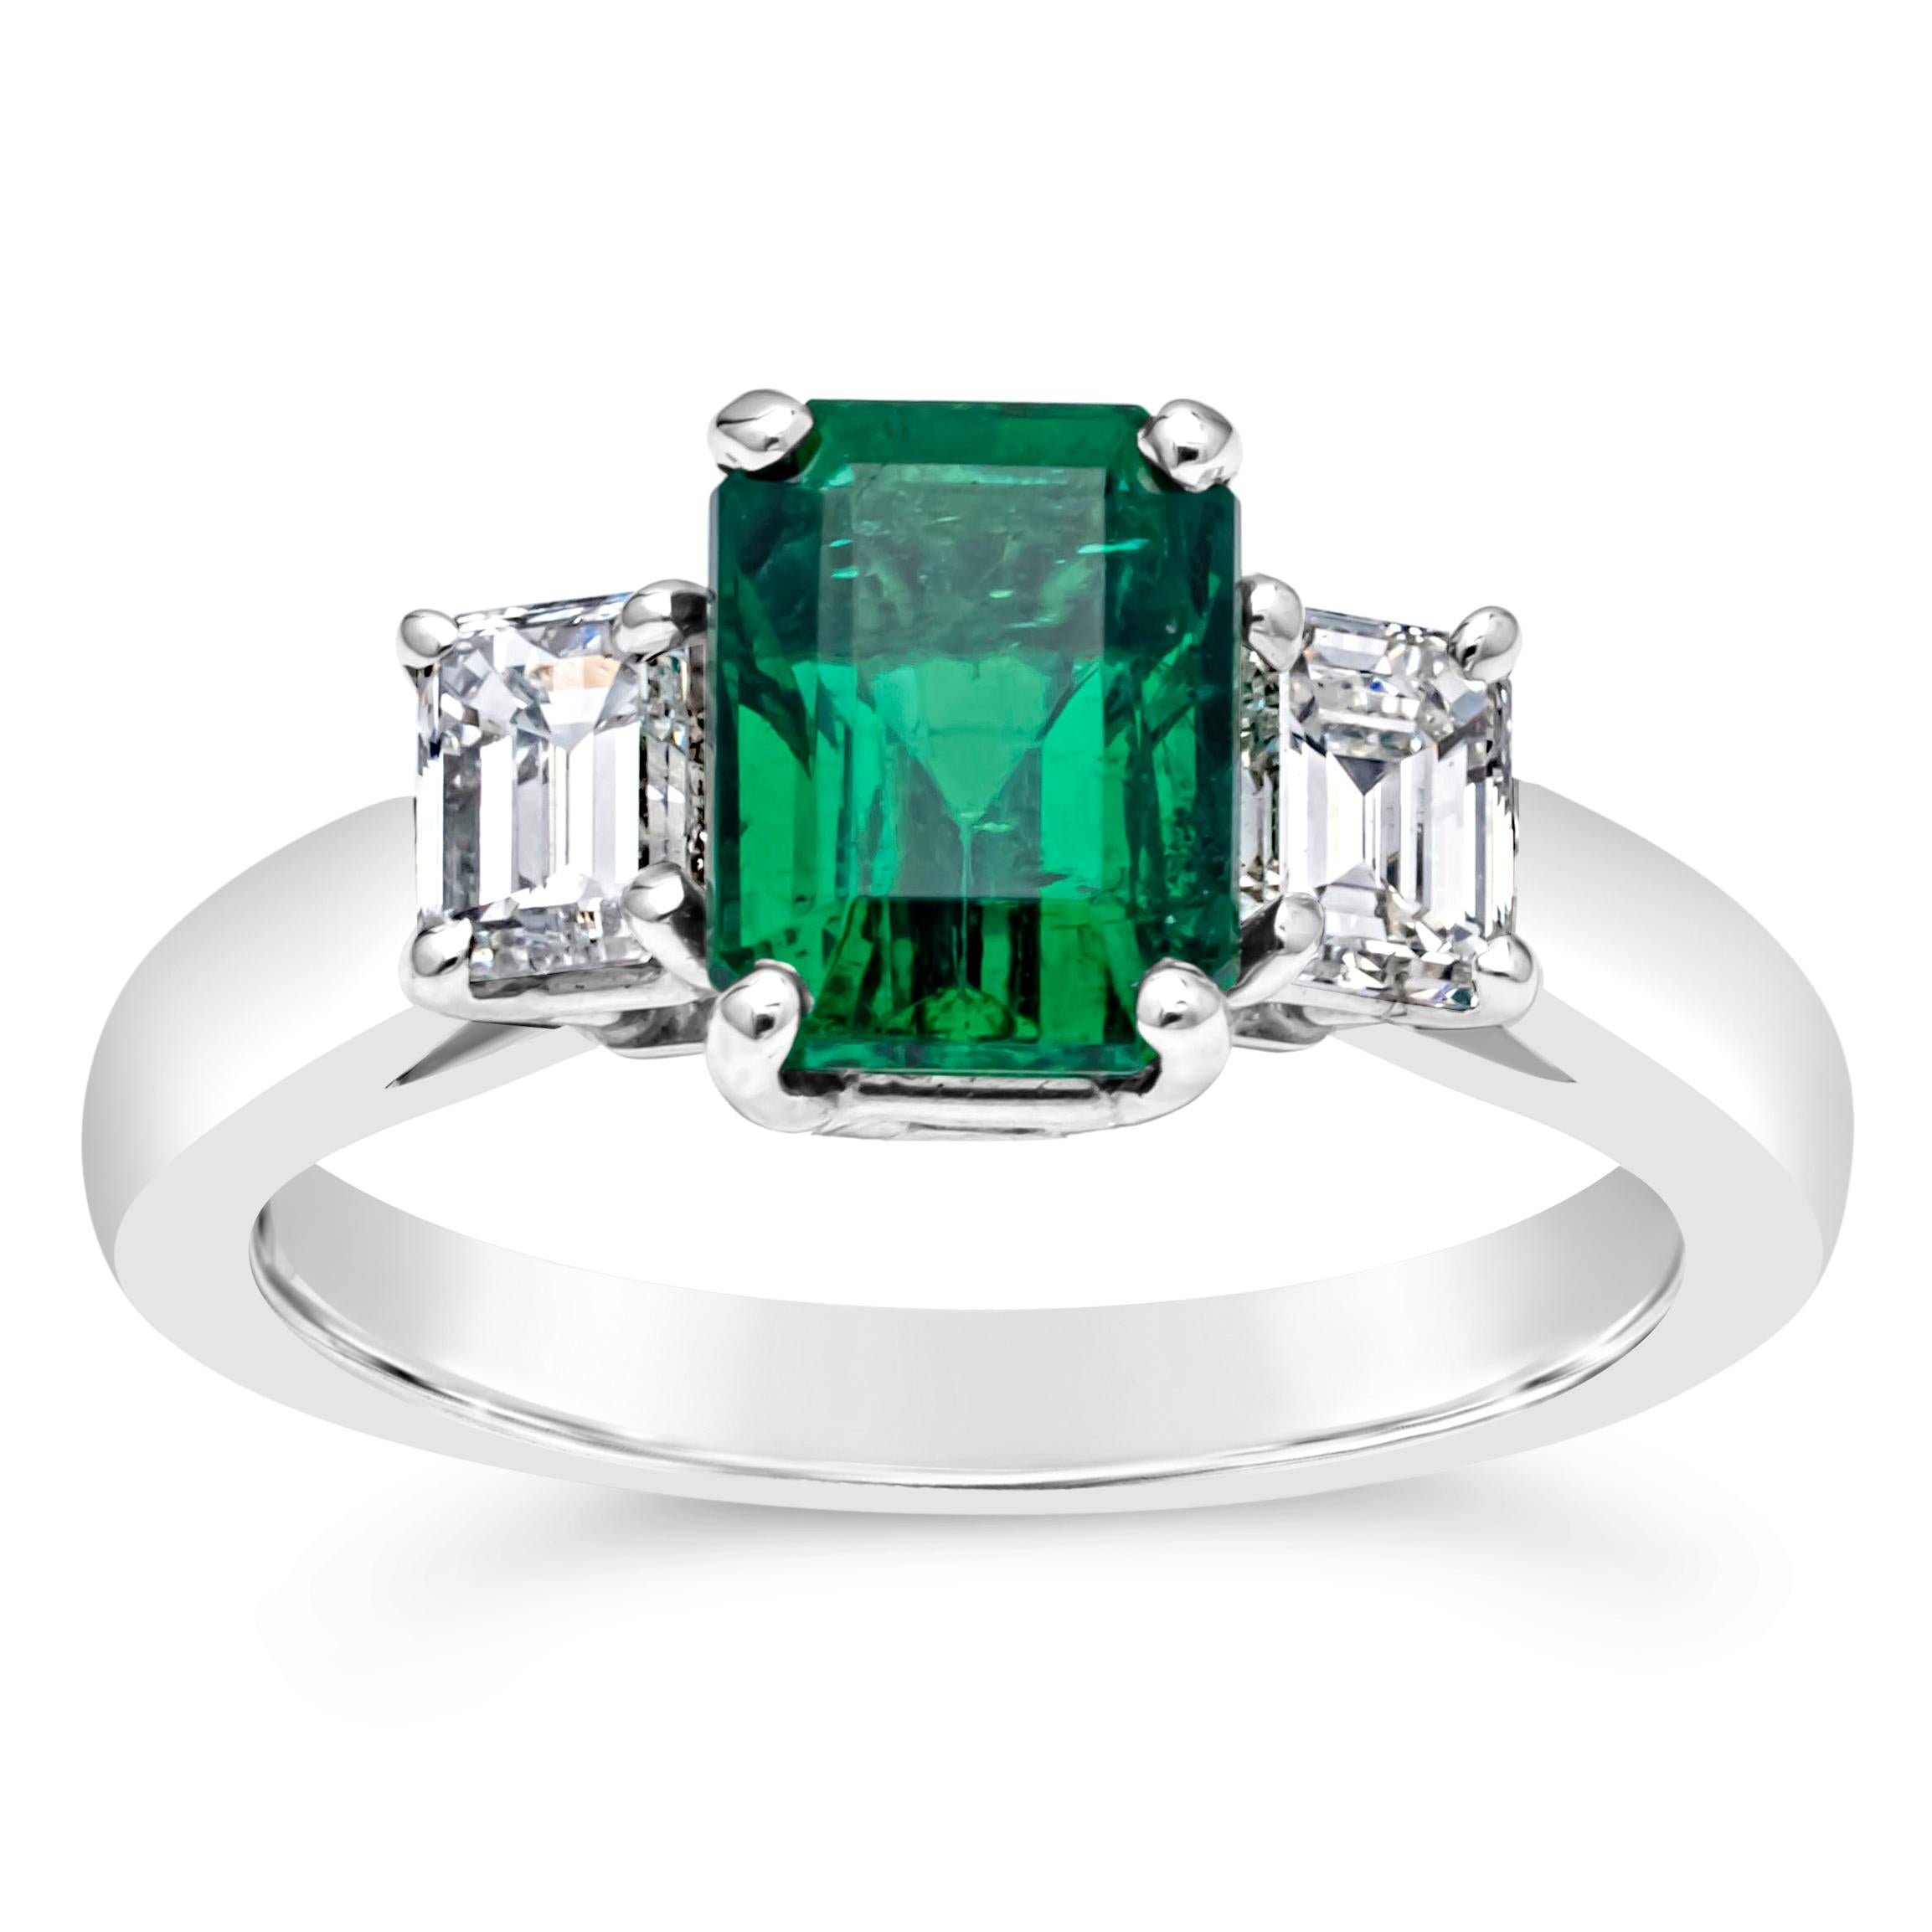 Contemporary 1.78 Carats Emerald Cut Green Emerald & Diamond Three Stone Engagement Ring For Sale